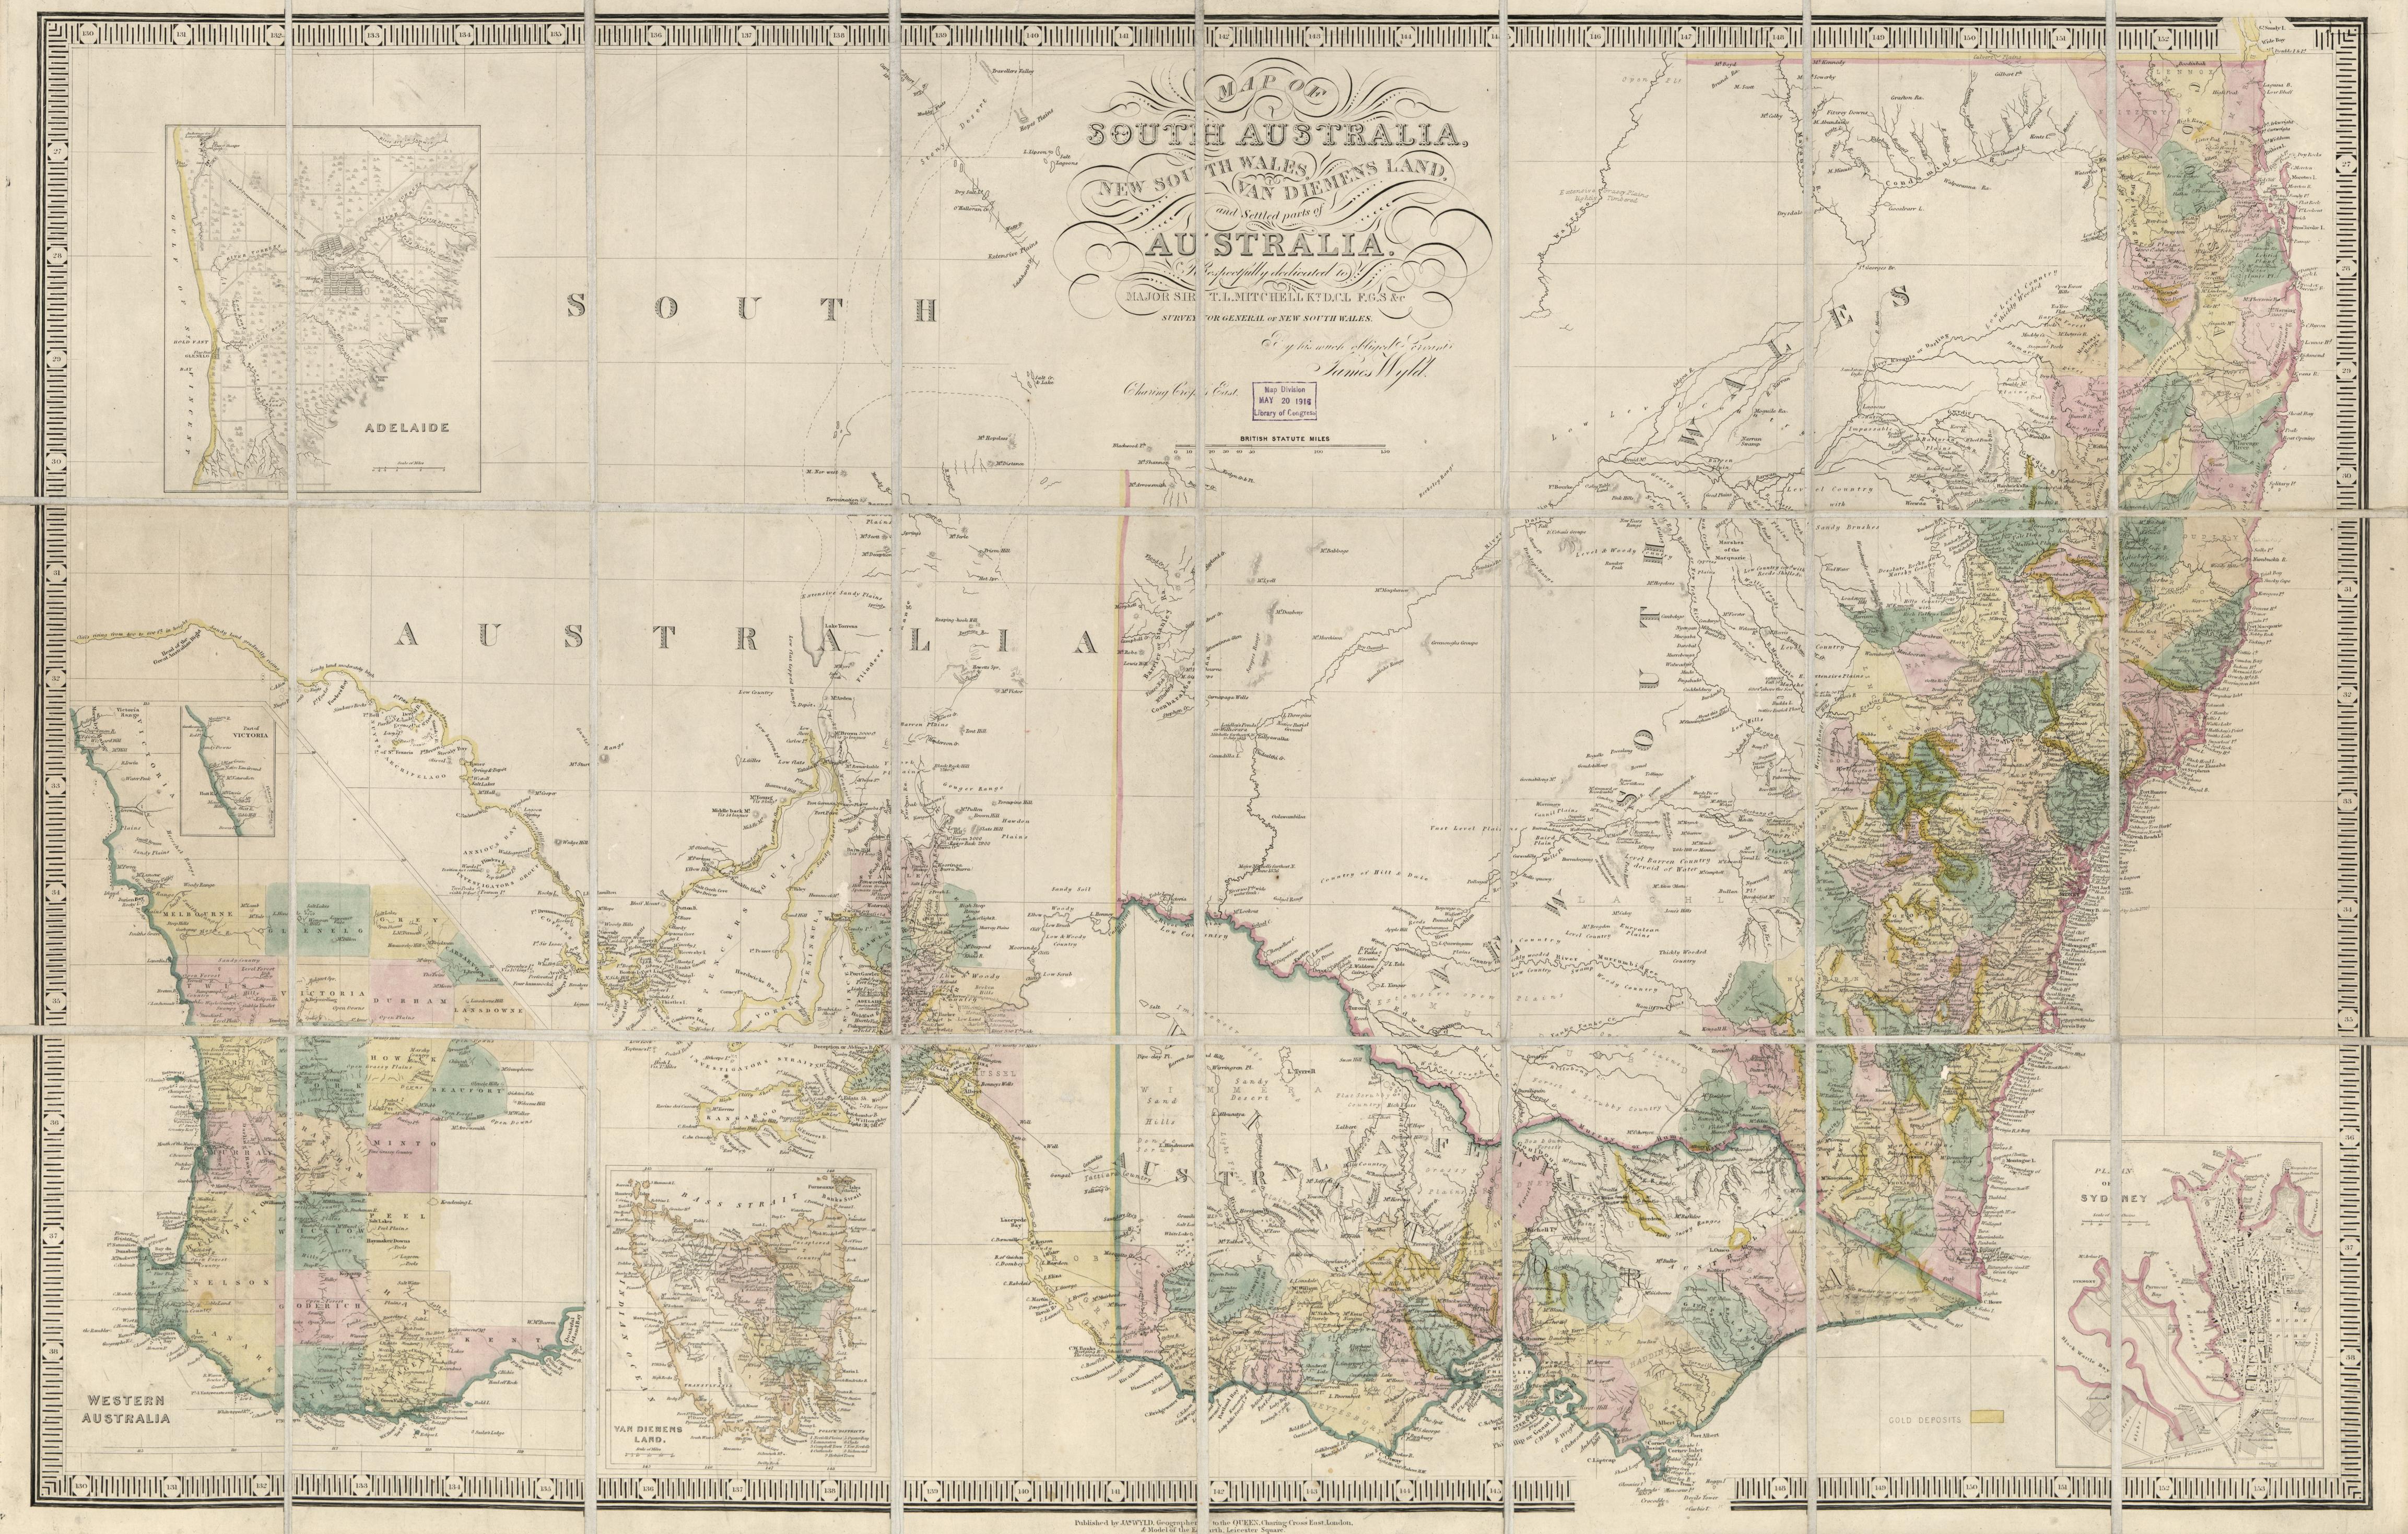 Map of South Australia, New South Wales, Van Diemens Land, and Settled parts of Australia. James Wyld, 1850[?]. Geography and Map Division, Library of Congress.